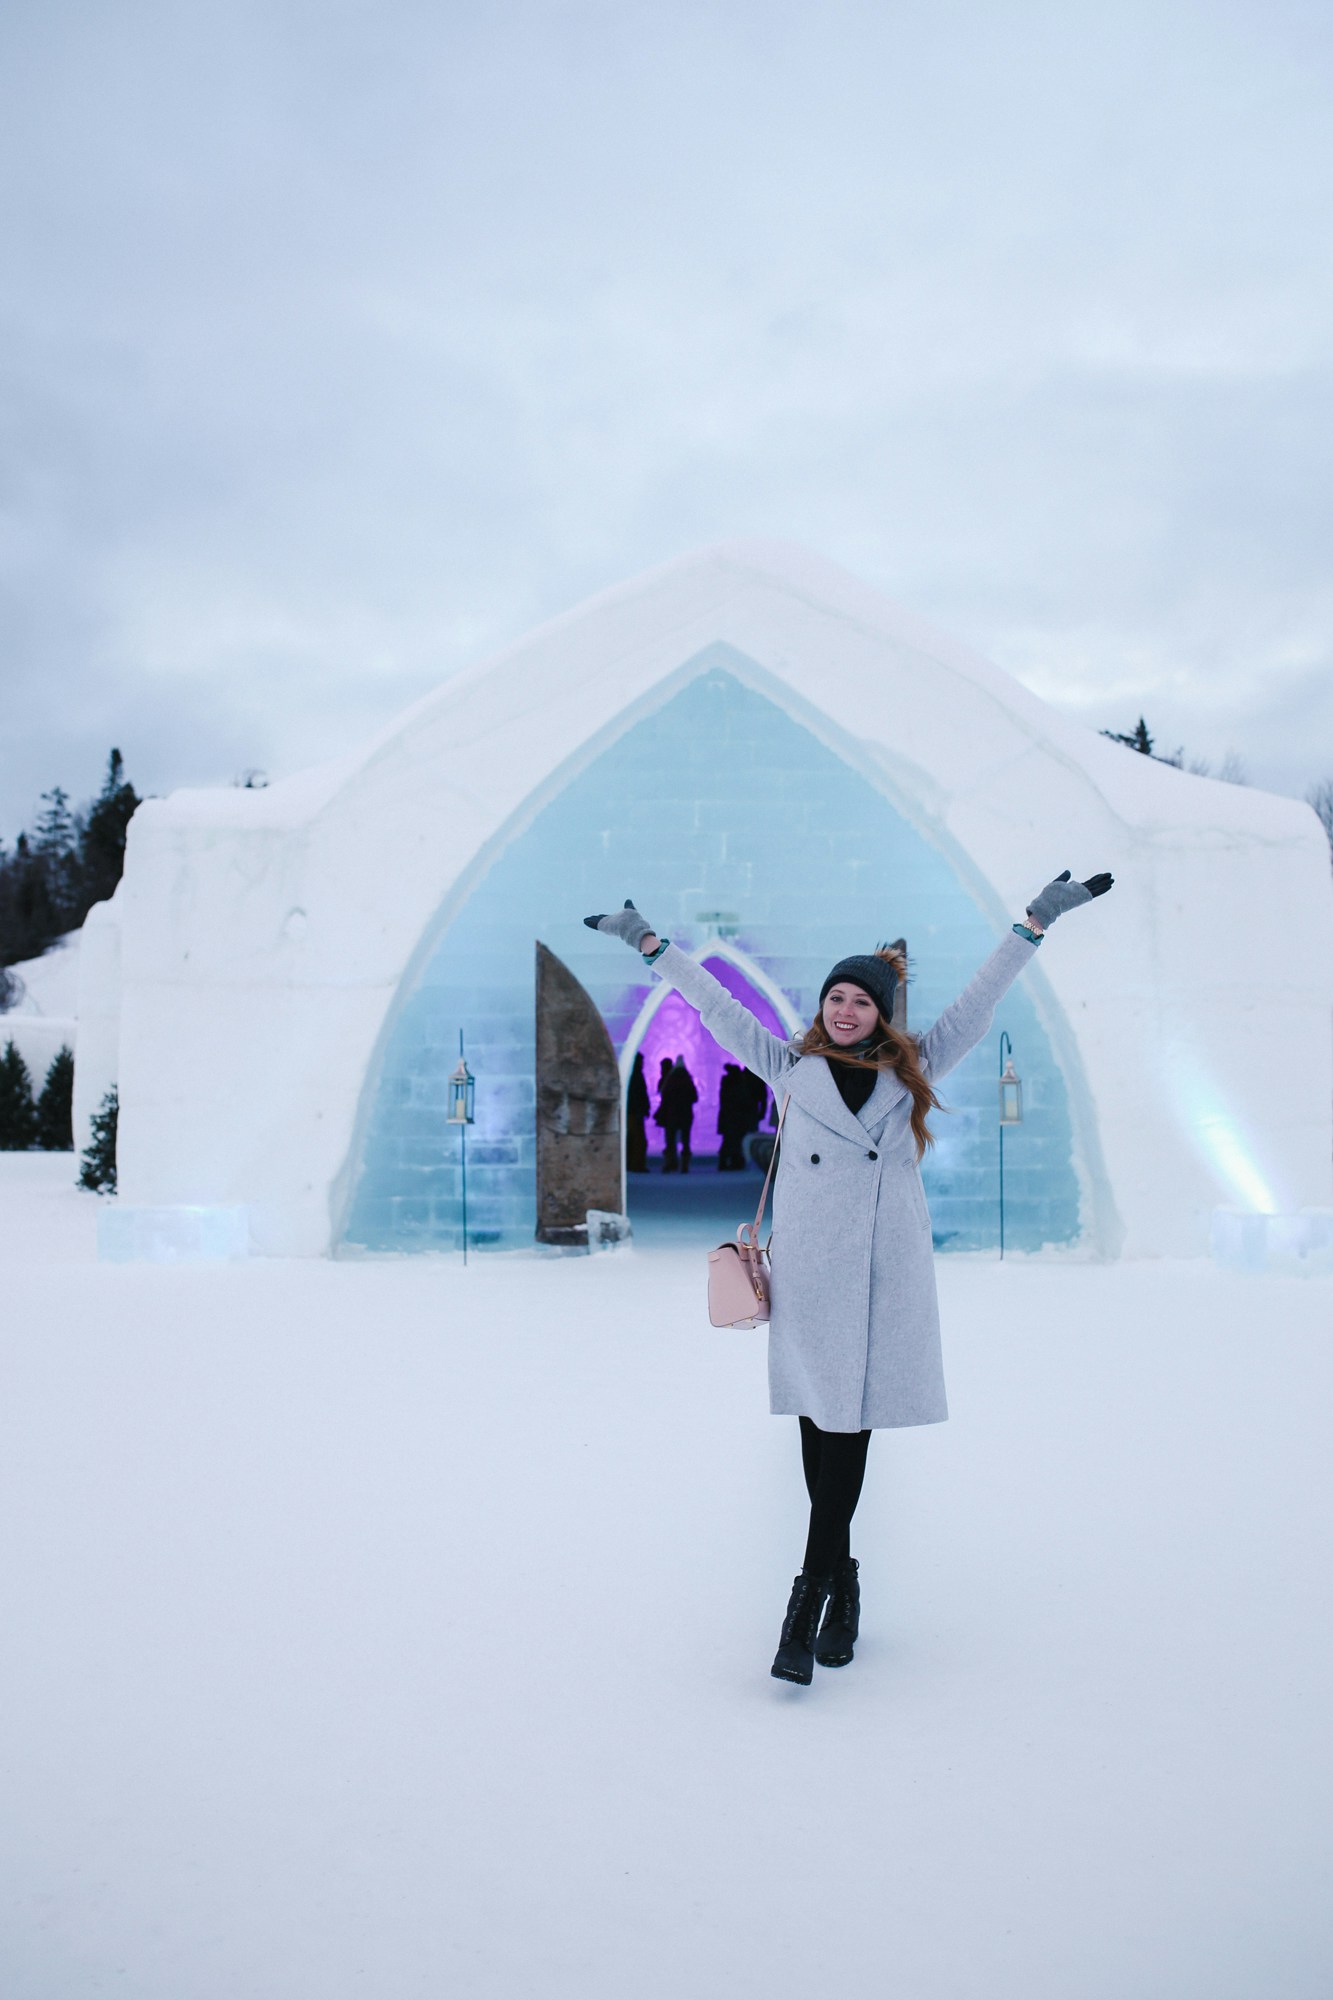 Top 10 Things to do in Quebec City in a weekend in winter: visit the Hotel de Glâce, an ice hotel located 40 minutes away and the only one in North America!